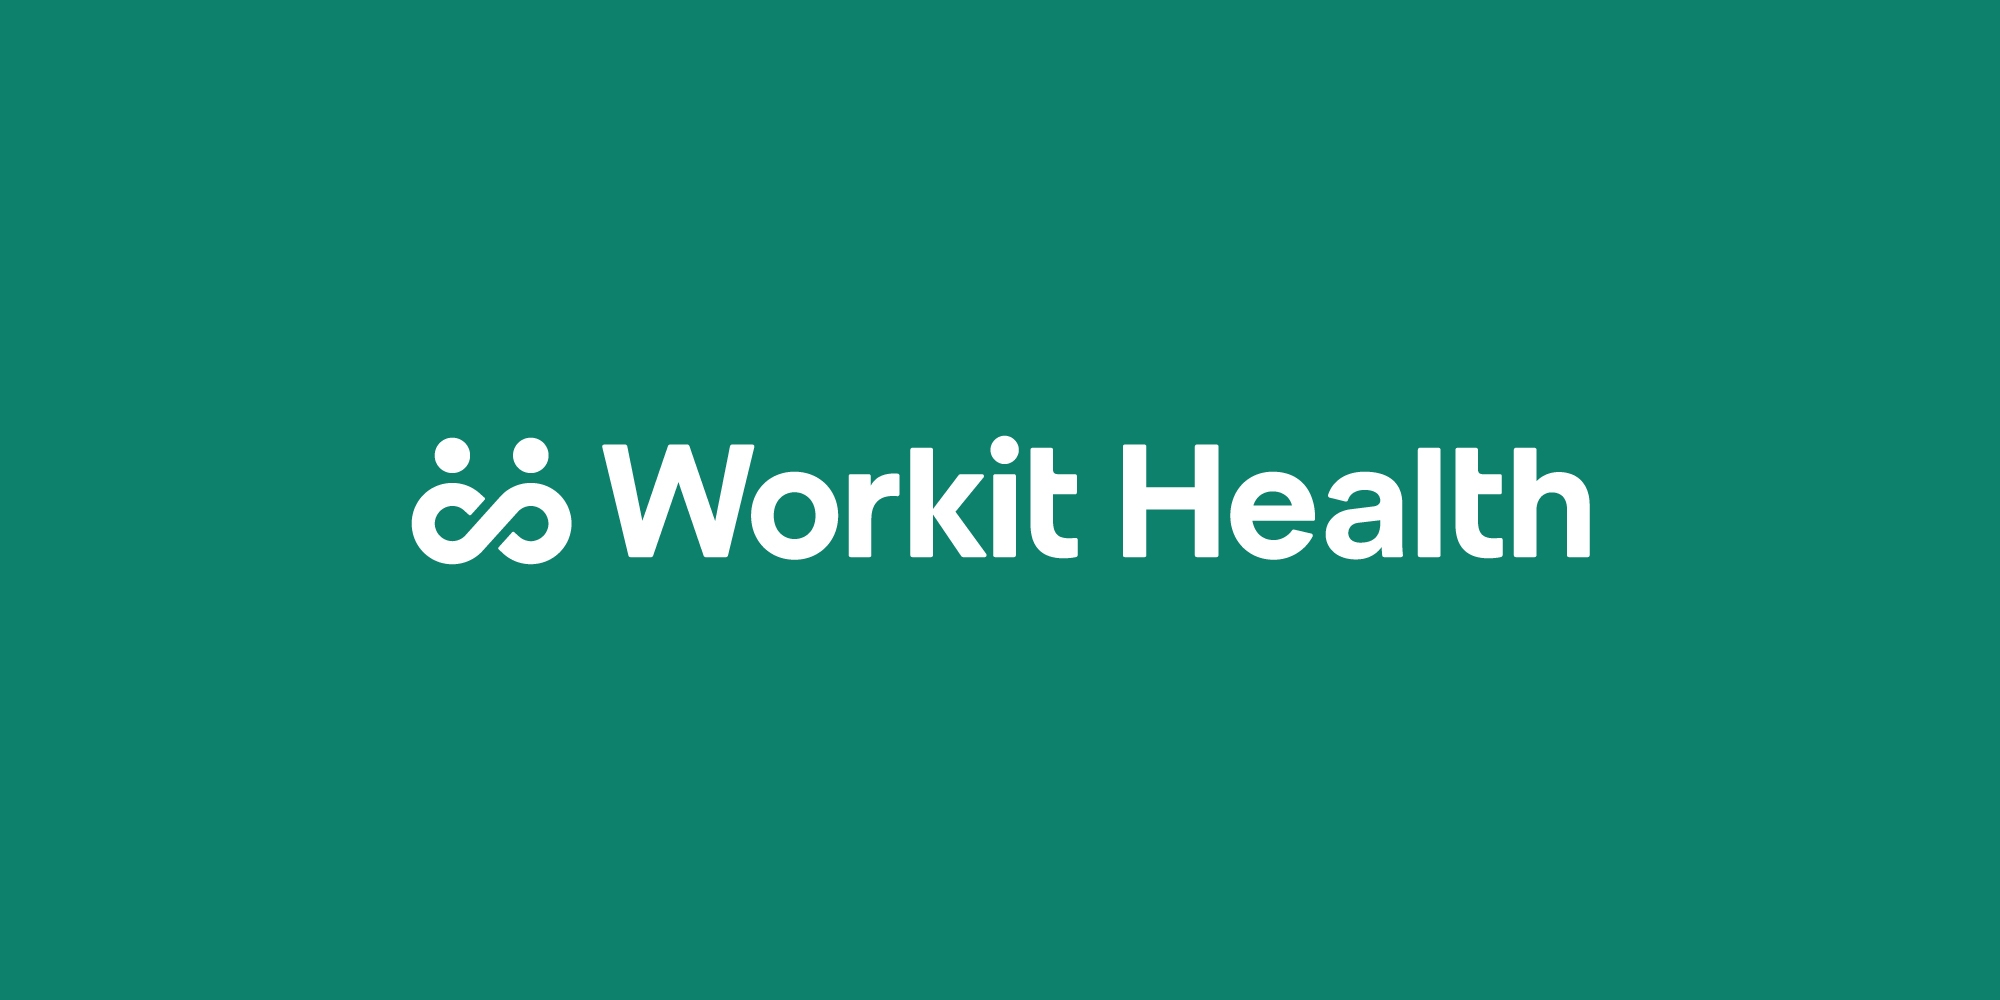 Workit Health logo on a green background